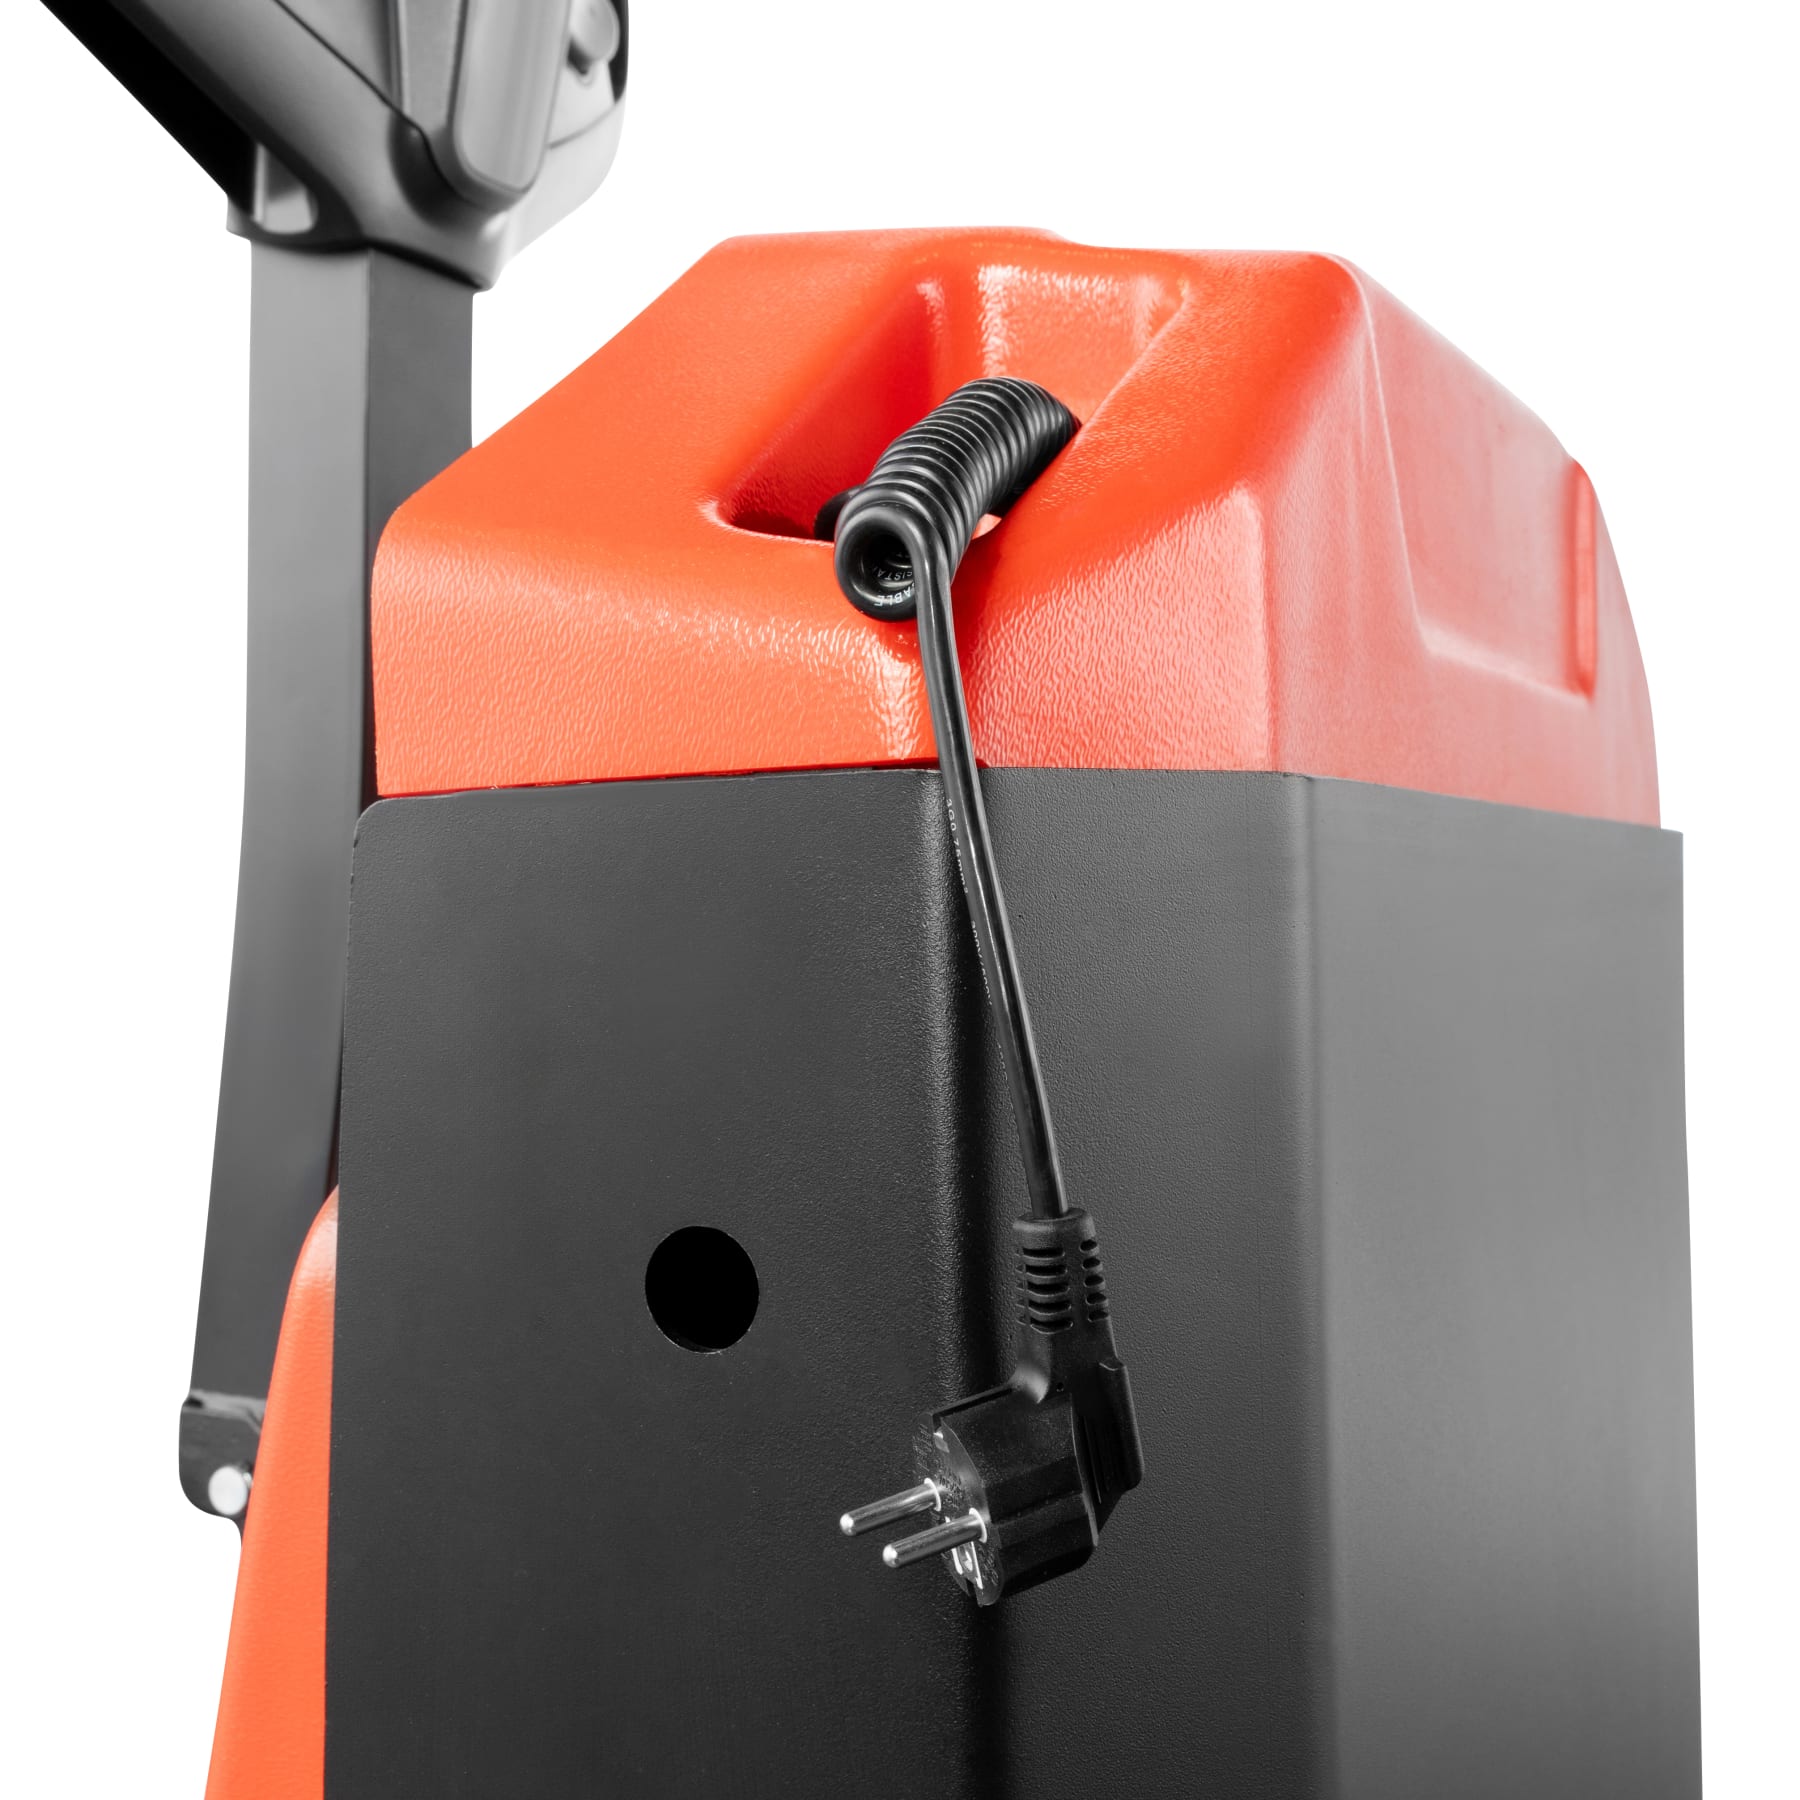 EP Electric Pallet Truck for 2000 kg